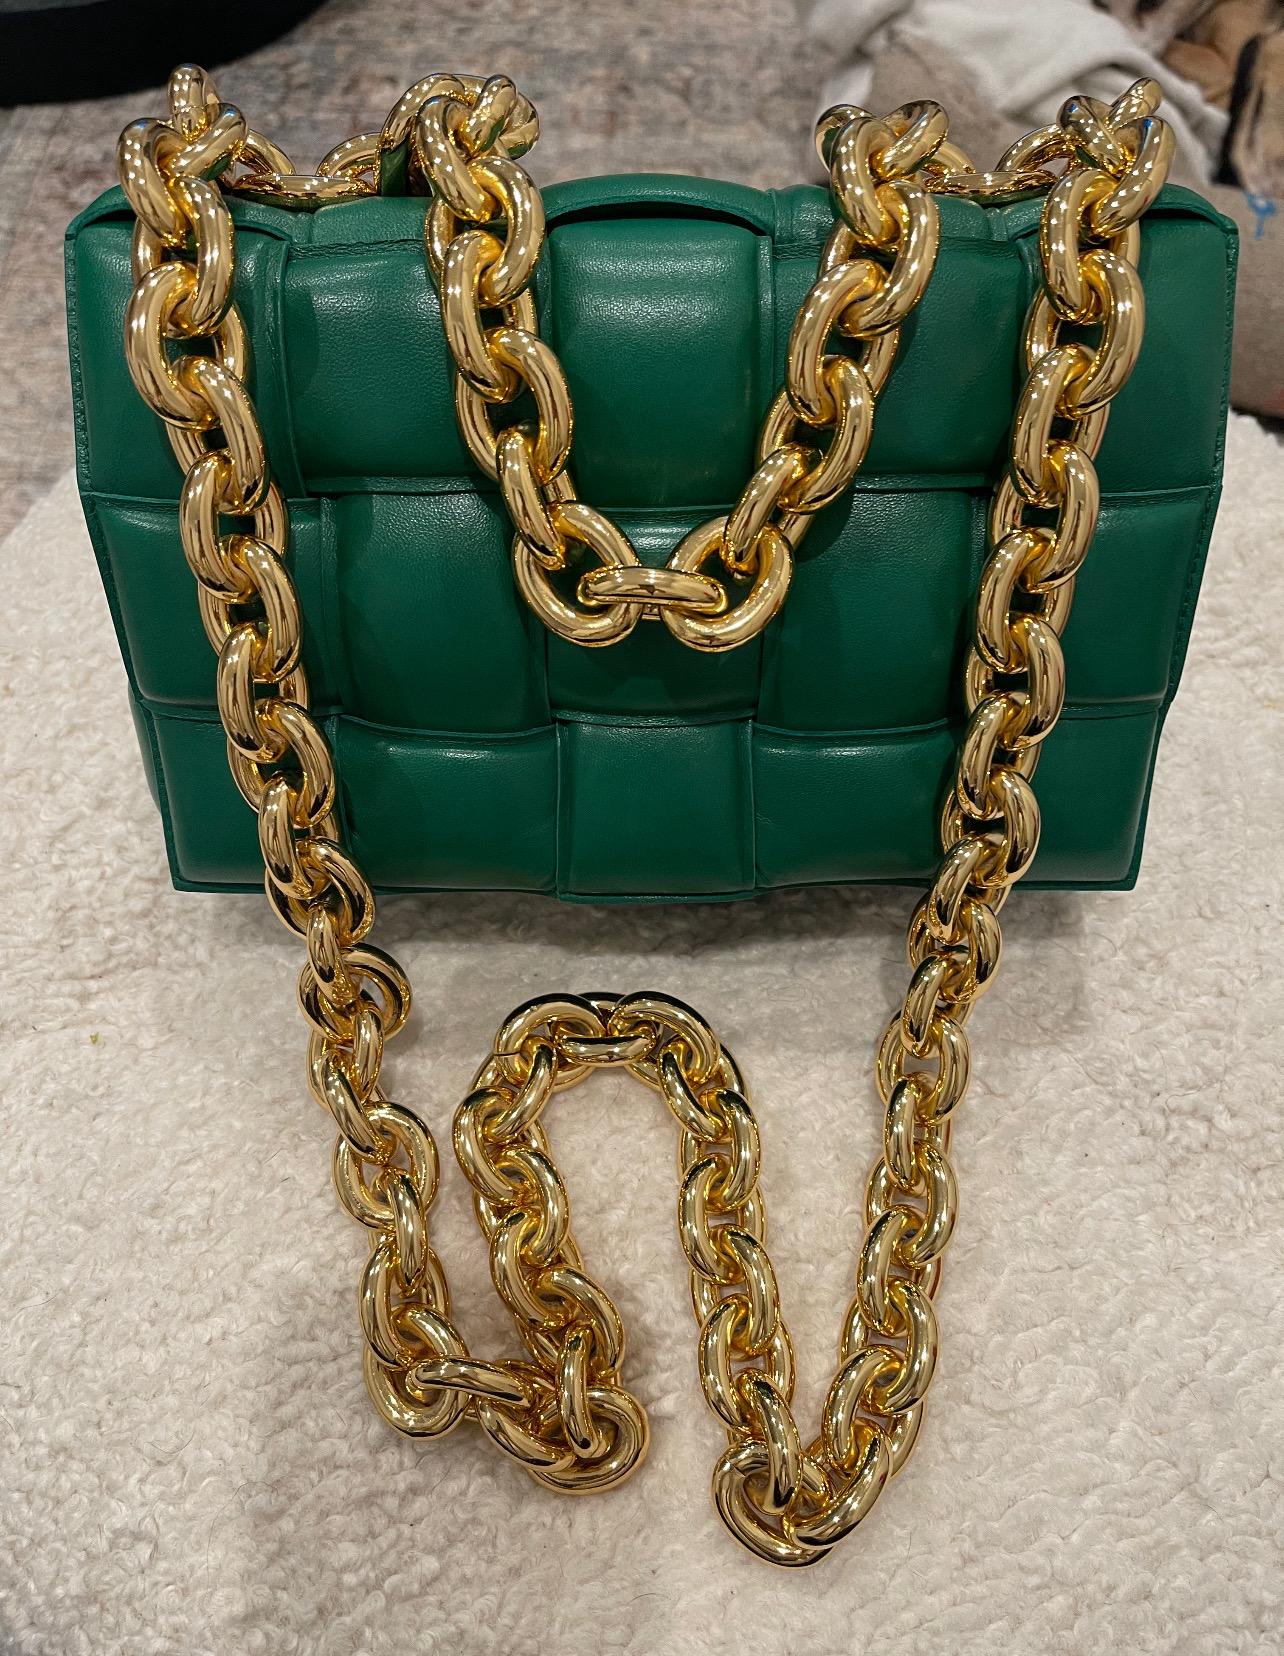 🖤 Timeless Bottega Classic 🖤

Bottega Veneta Green Lambskin Padded Cassette

This stunning woven, padded, leather, lambskin bag from Bottega Veneta features a large-scale shoulder chain drop and hand chain! This bag is opened and closed with a top